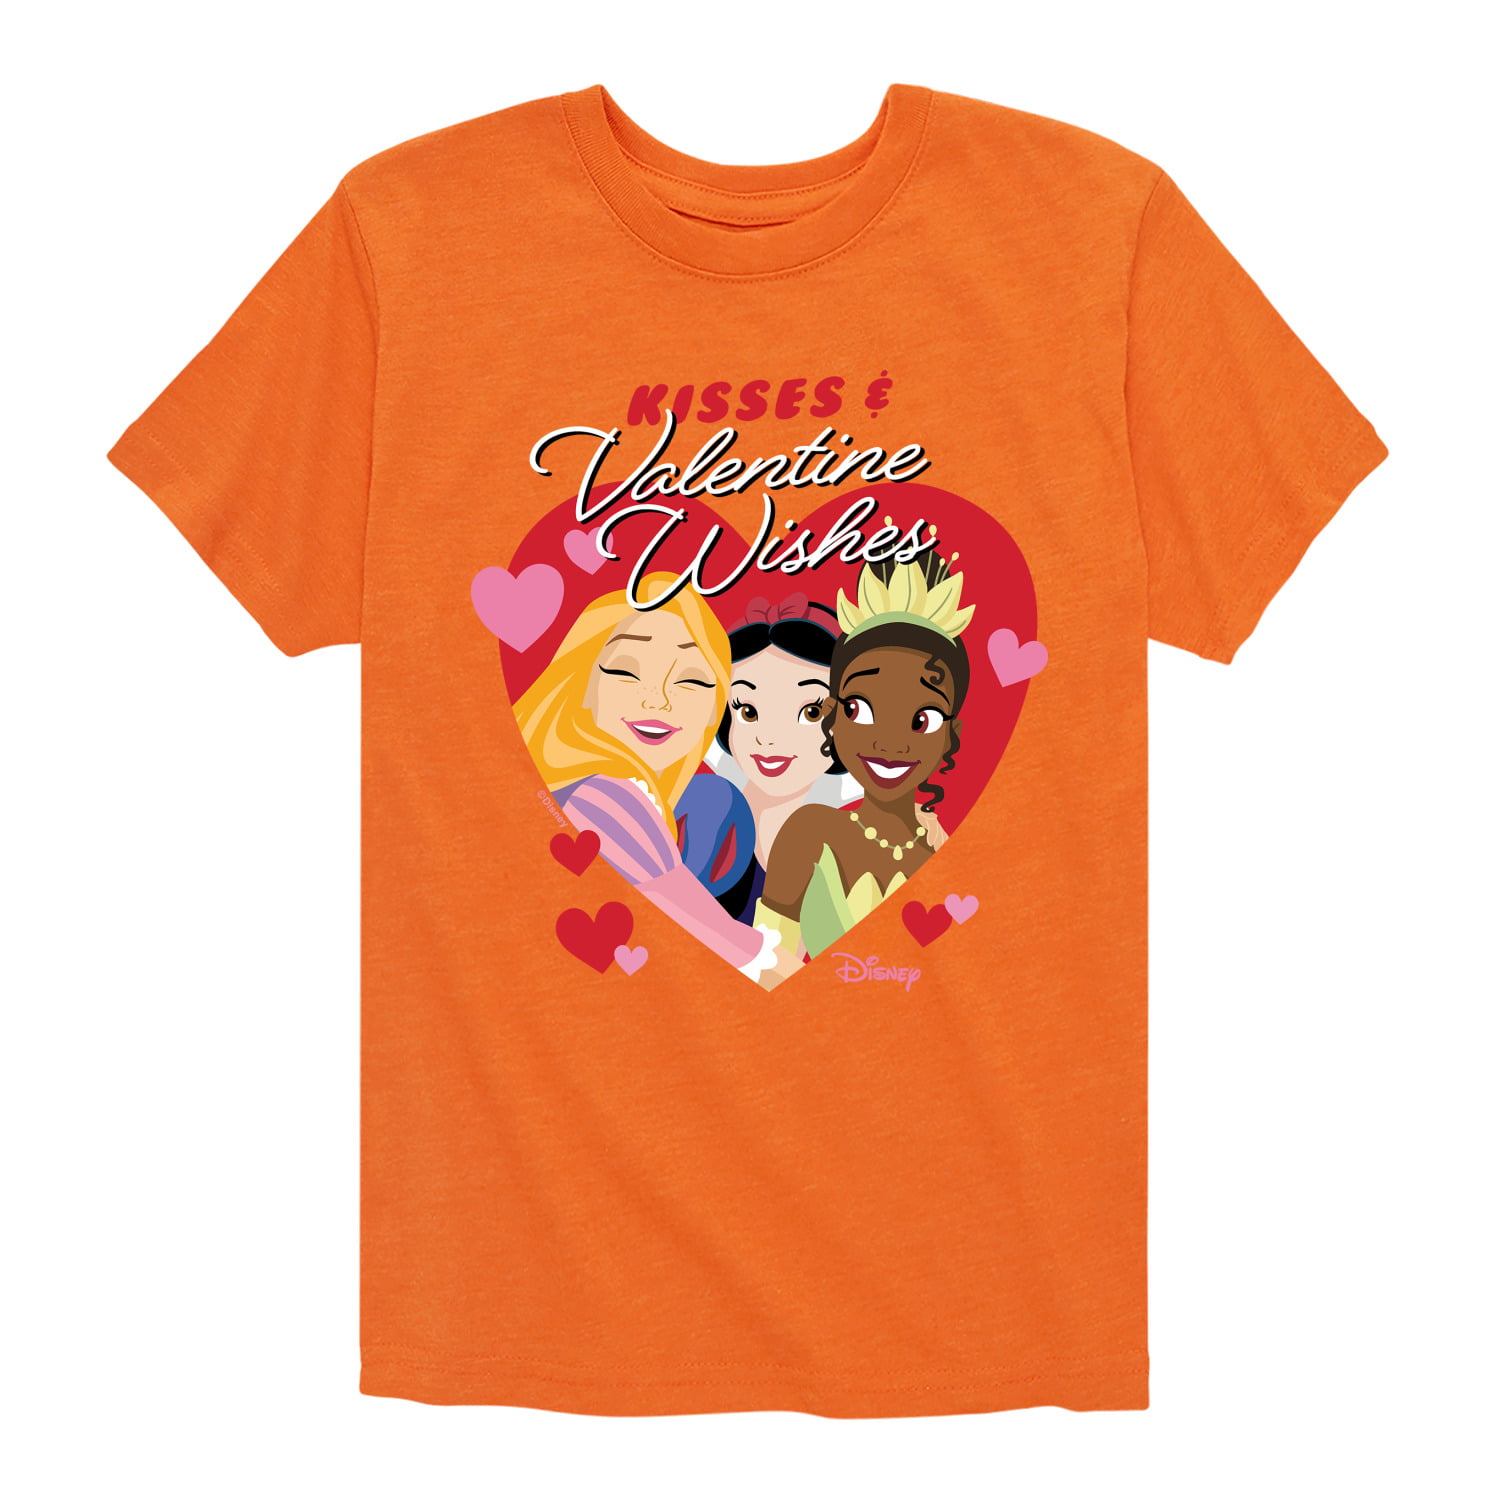 Disney Princess - Kisses and Valentine Wishes - Youth Short Sleeve Graphic T -Shirt 